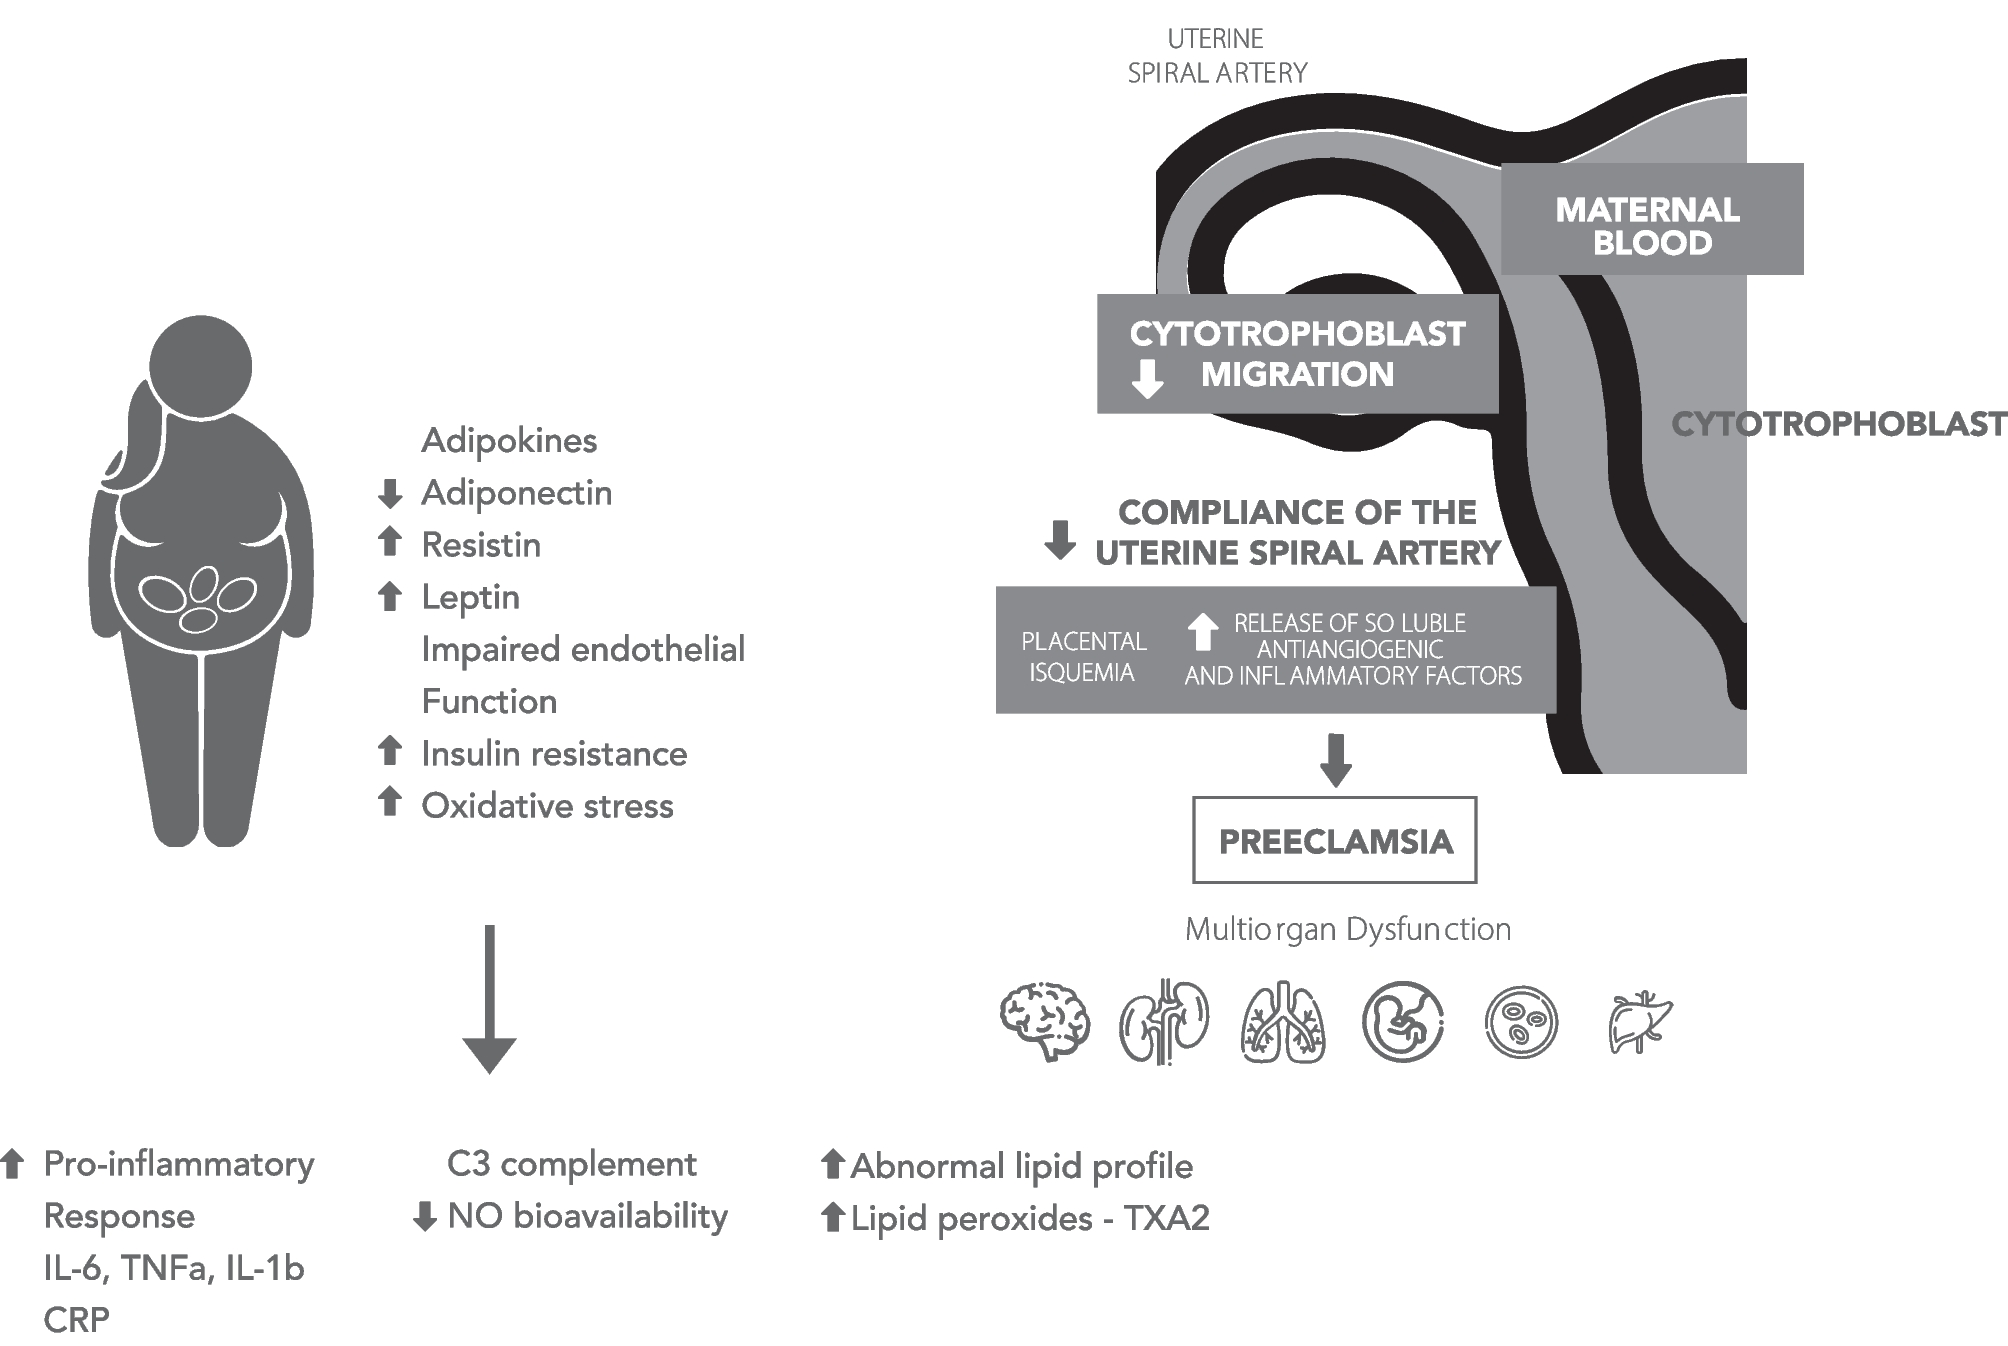 The Role of Obesity in the Development of Preeclampsia